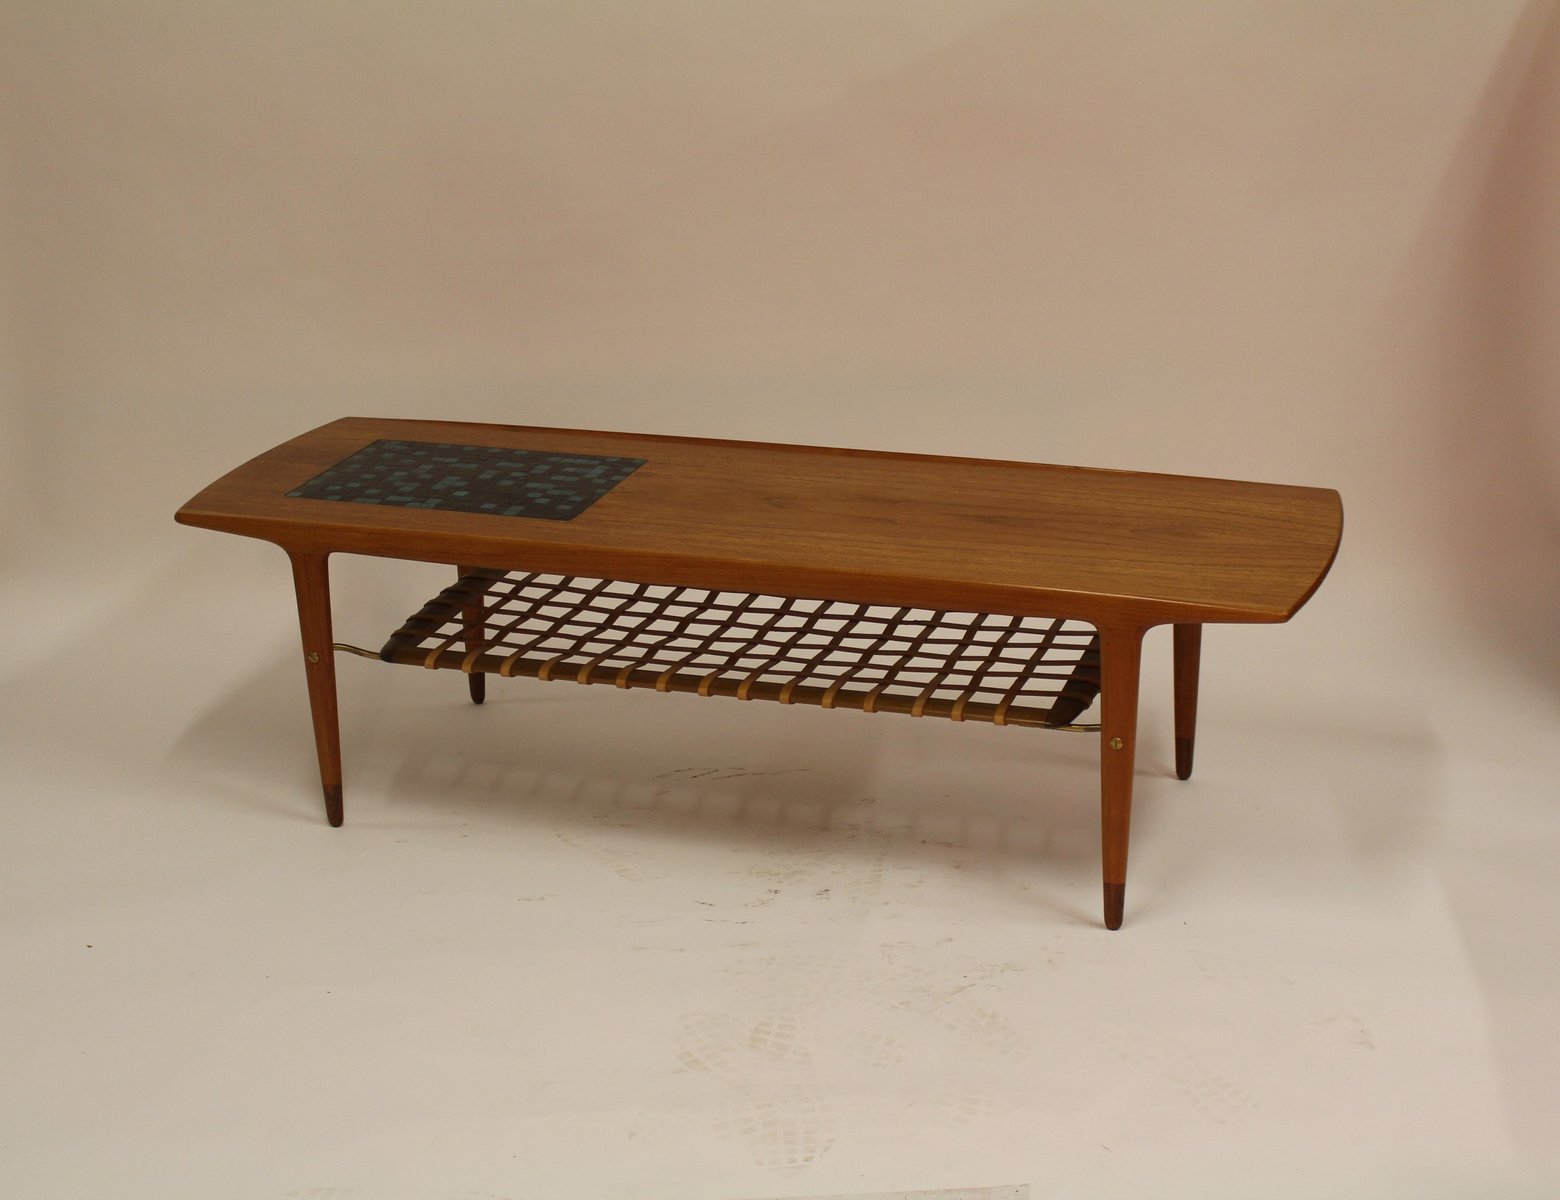 Vintage Danish Teak Coffee Table with Ceramic Tiles and ...